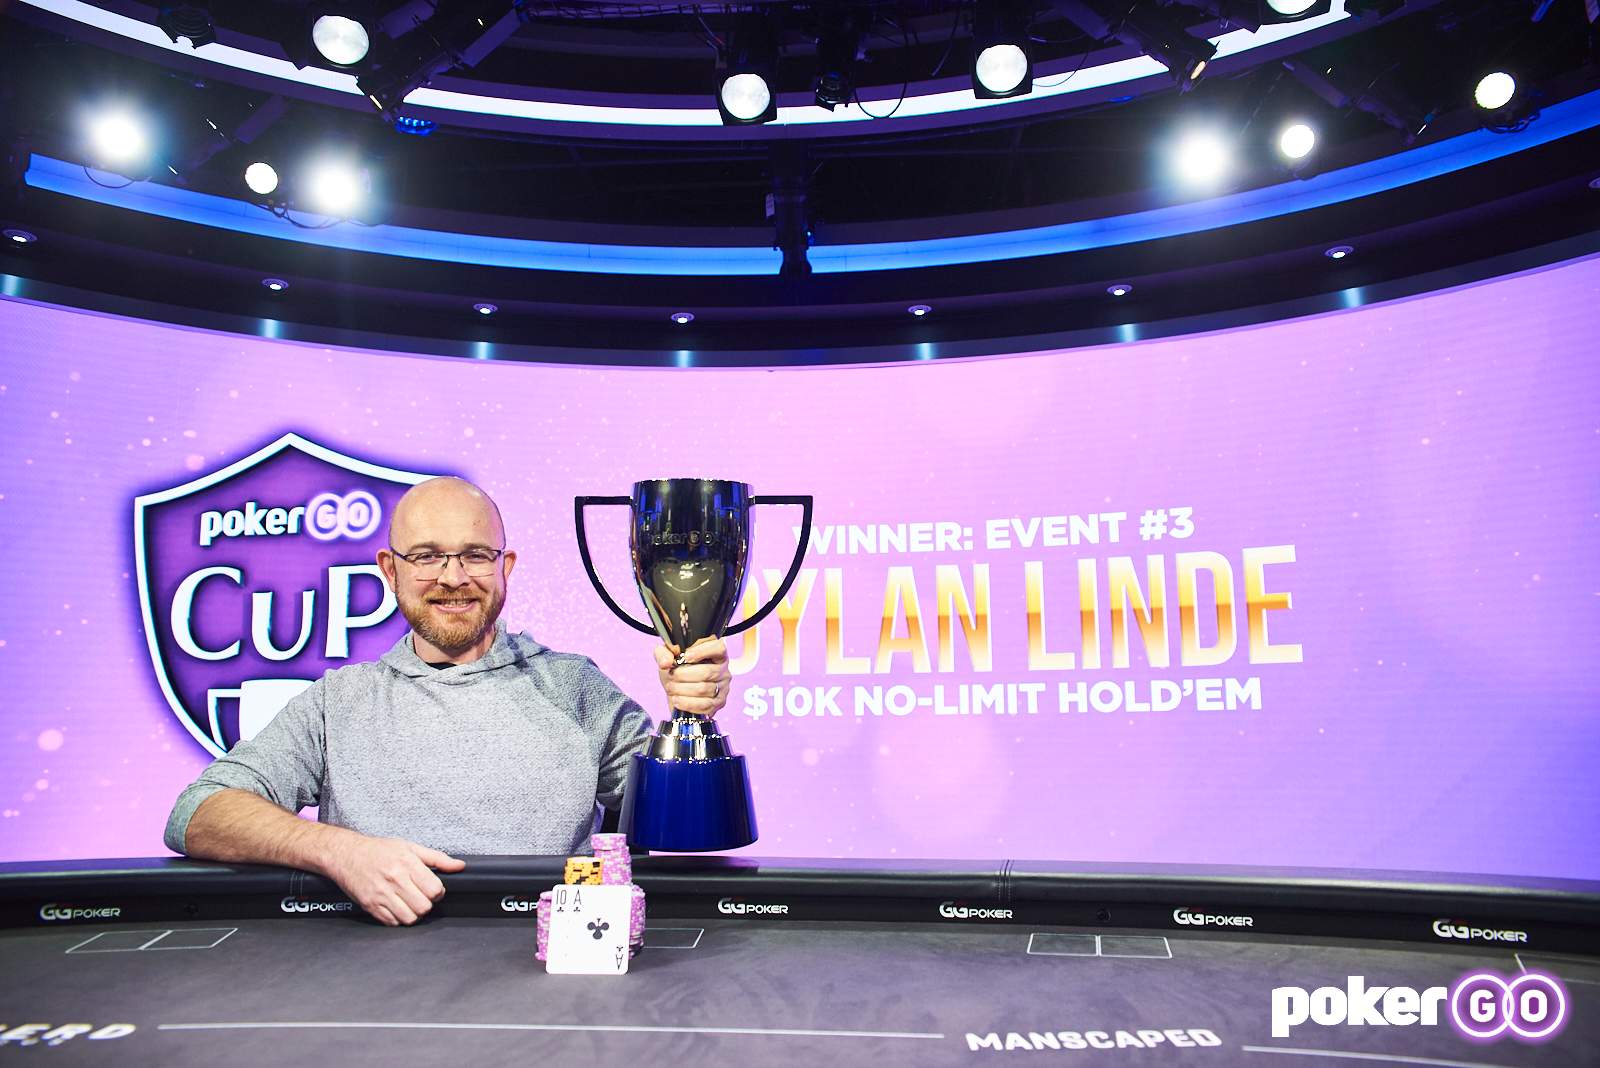 Dylan Linde Victorious in Third Event of 2021 PokerGO Cup, Wins $169,600